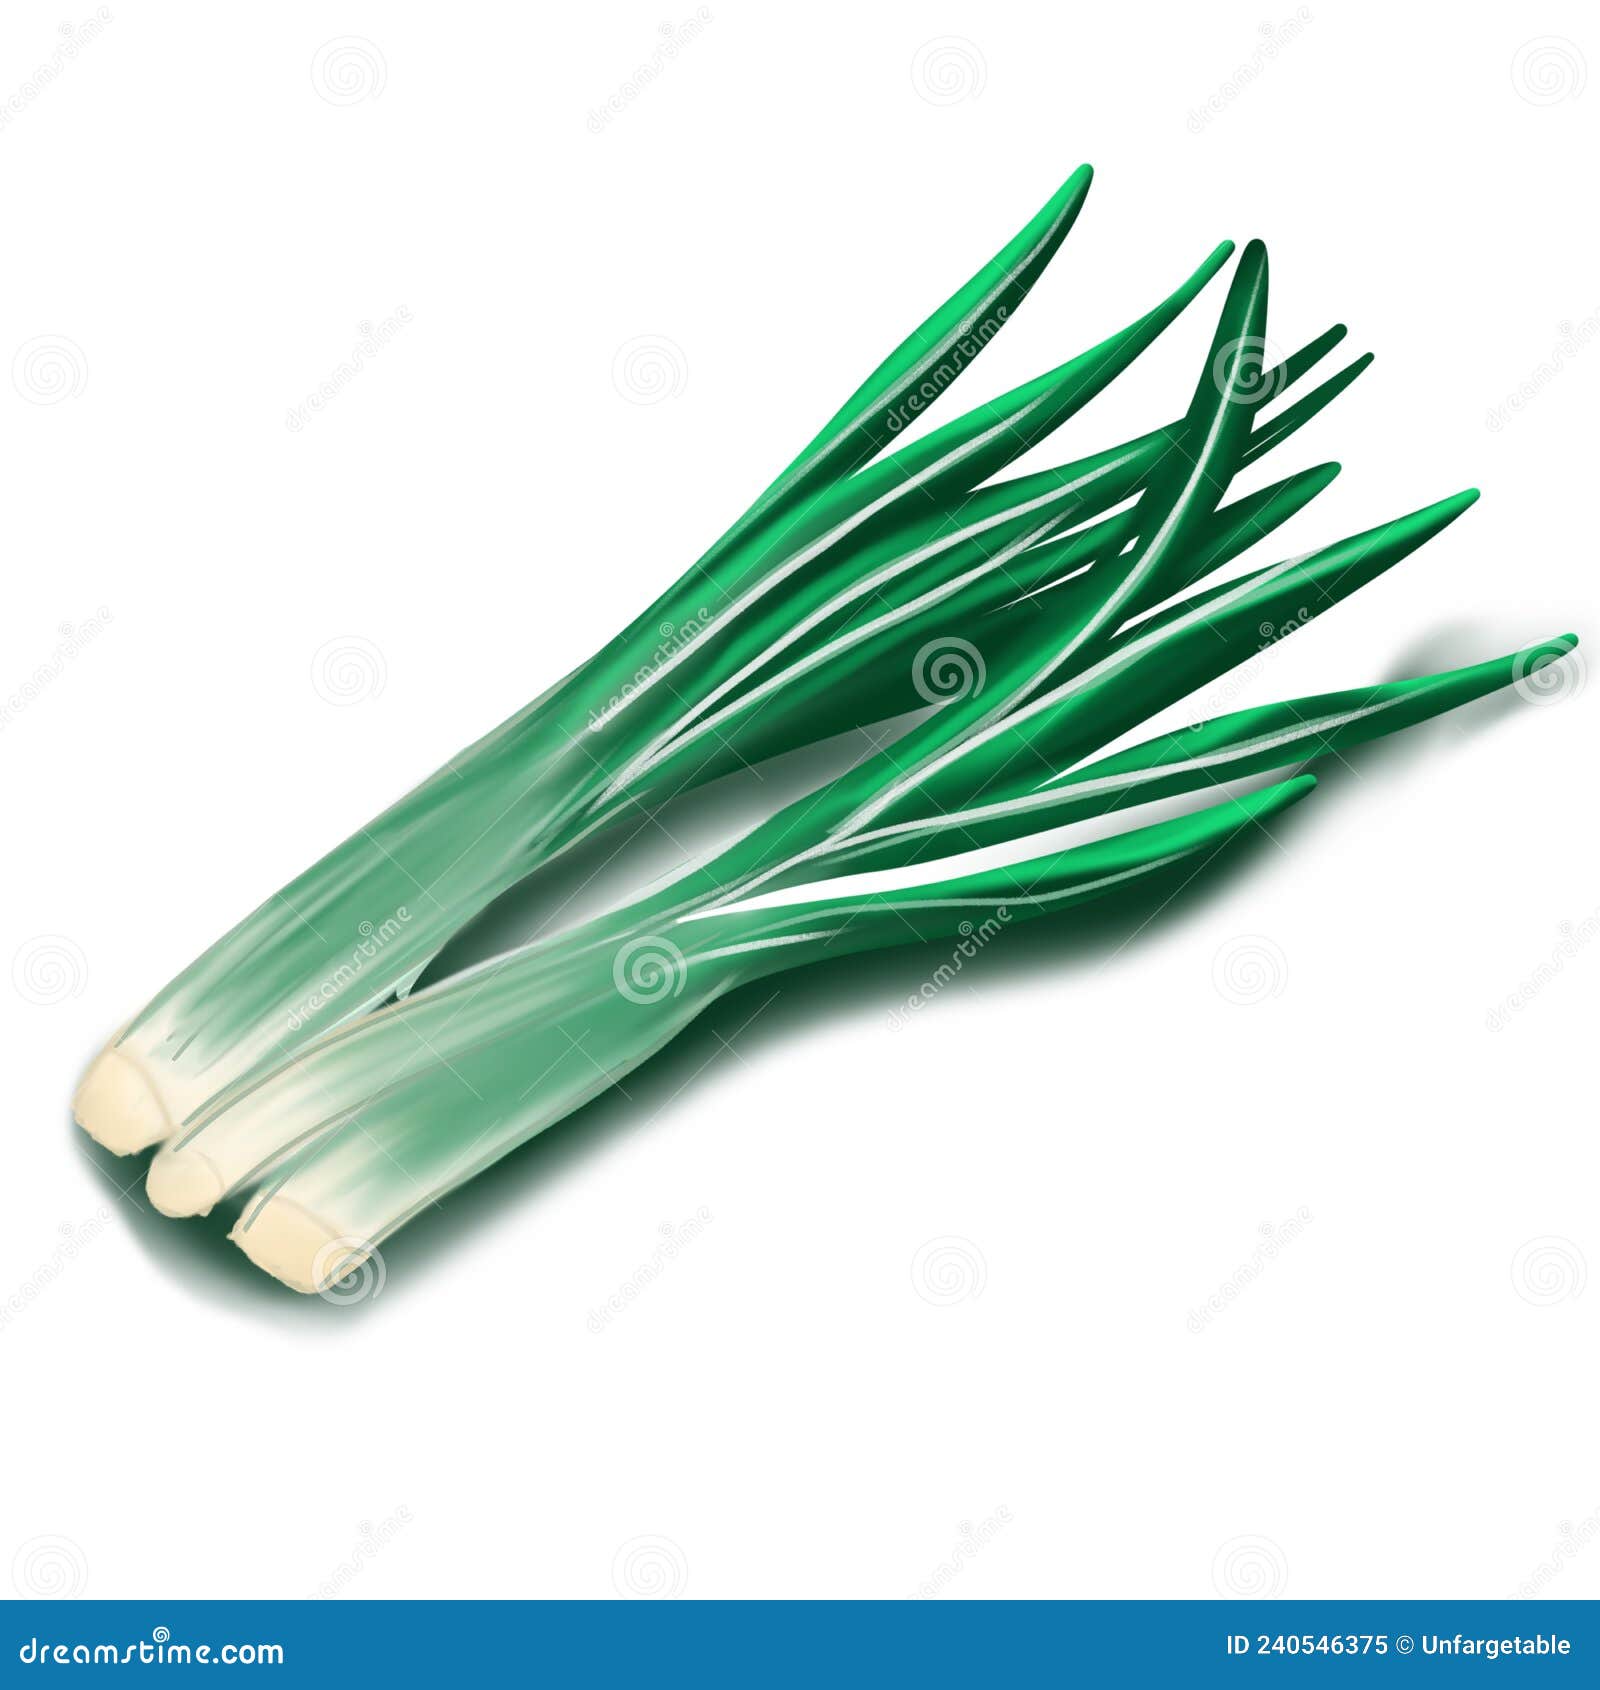 https://thumbs.dreamstime.com/z/green-spring-onions-isolated-white-background-vector-chopped-chives-illustration-fresh-cut-green-onion-green-spring-onions-240546375.jpg